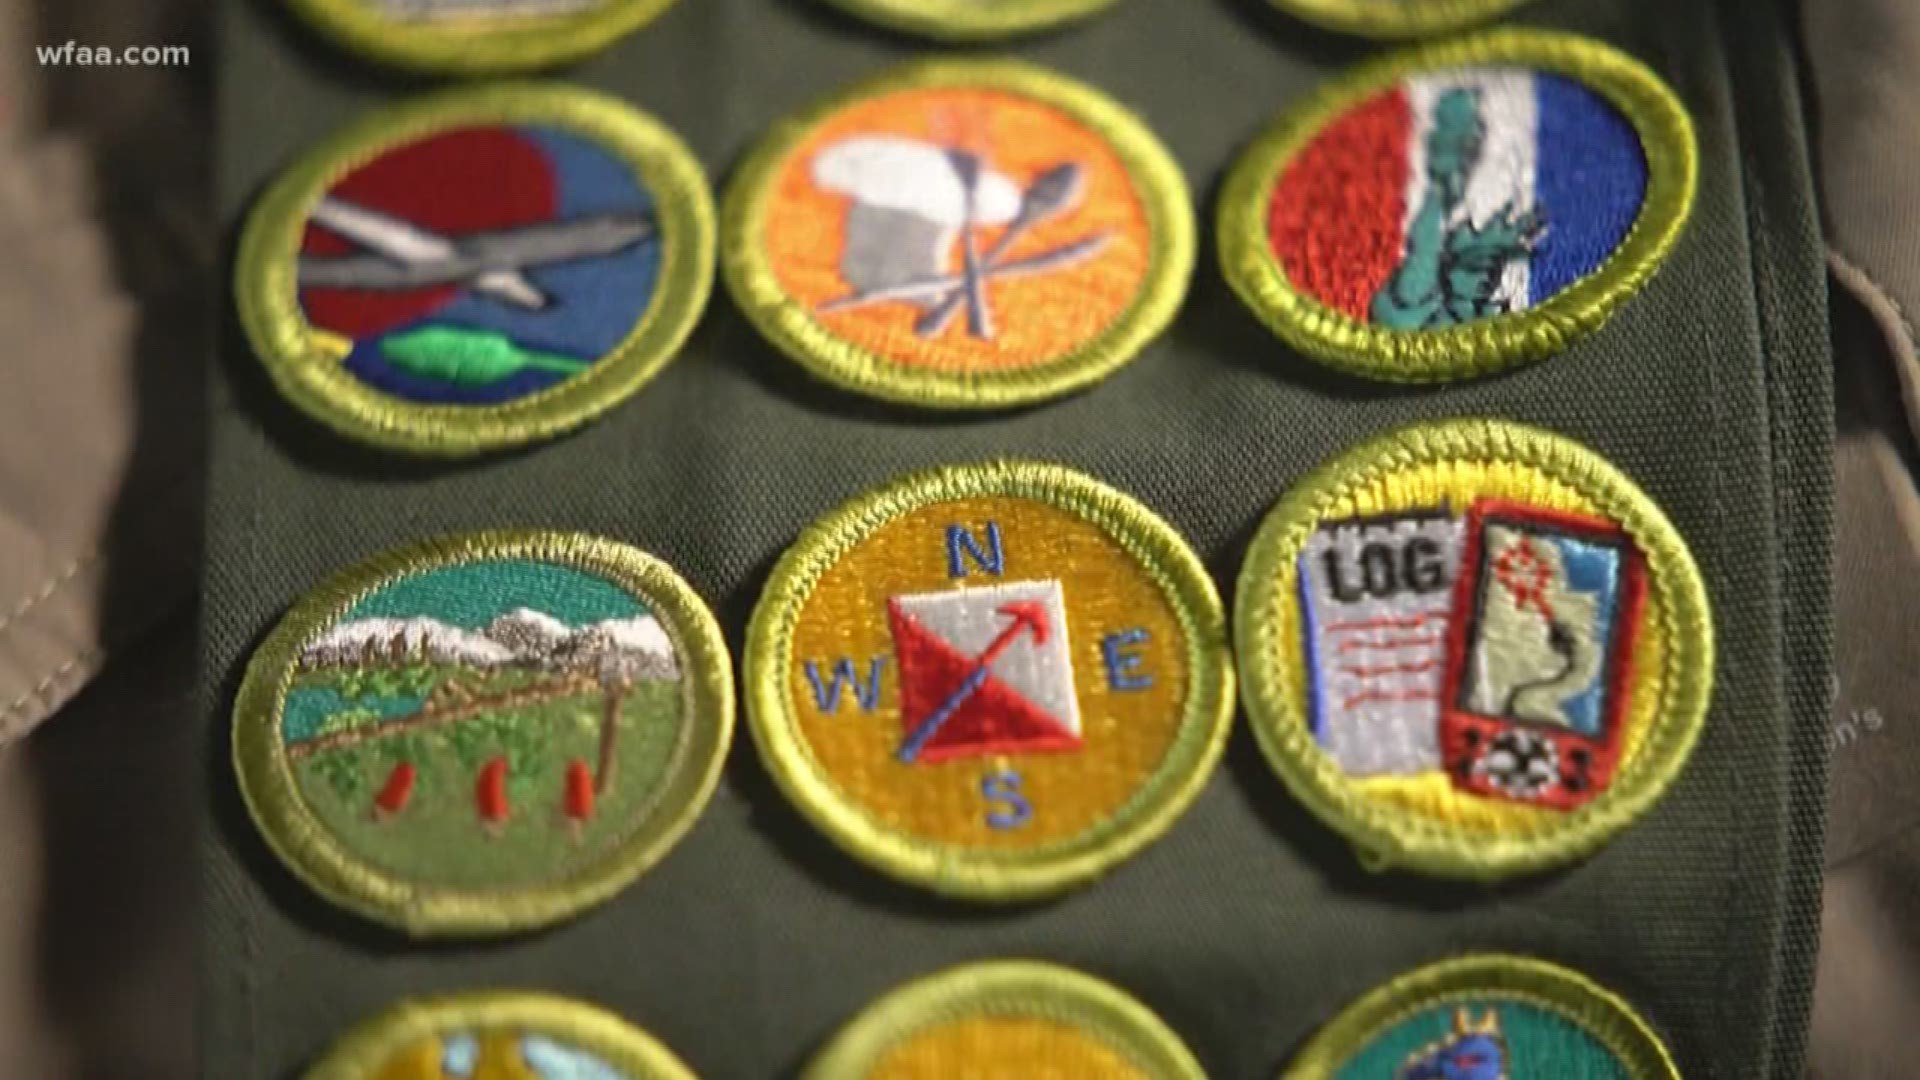 Tueday's bankruptcy filings said the Boy Scouts of America has spent more than $150 million on settlements and legal costs from 2017-2019.